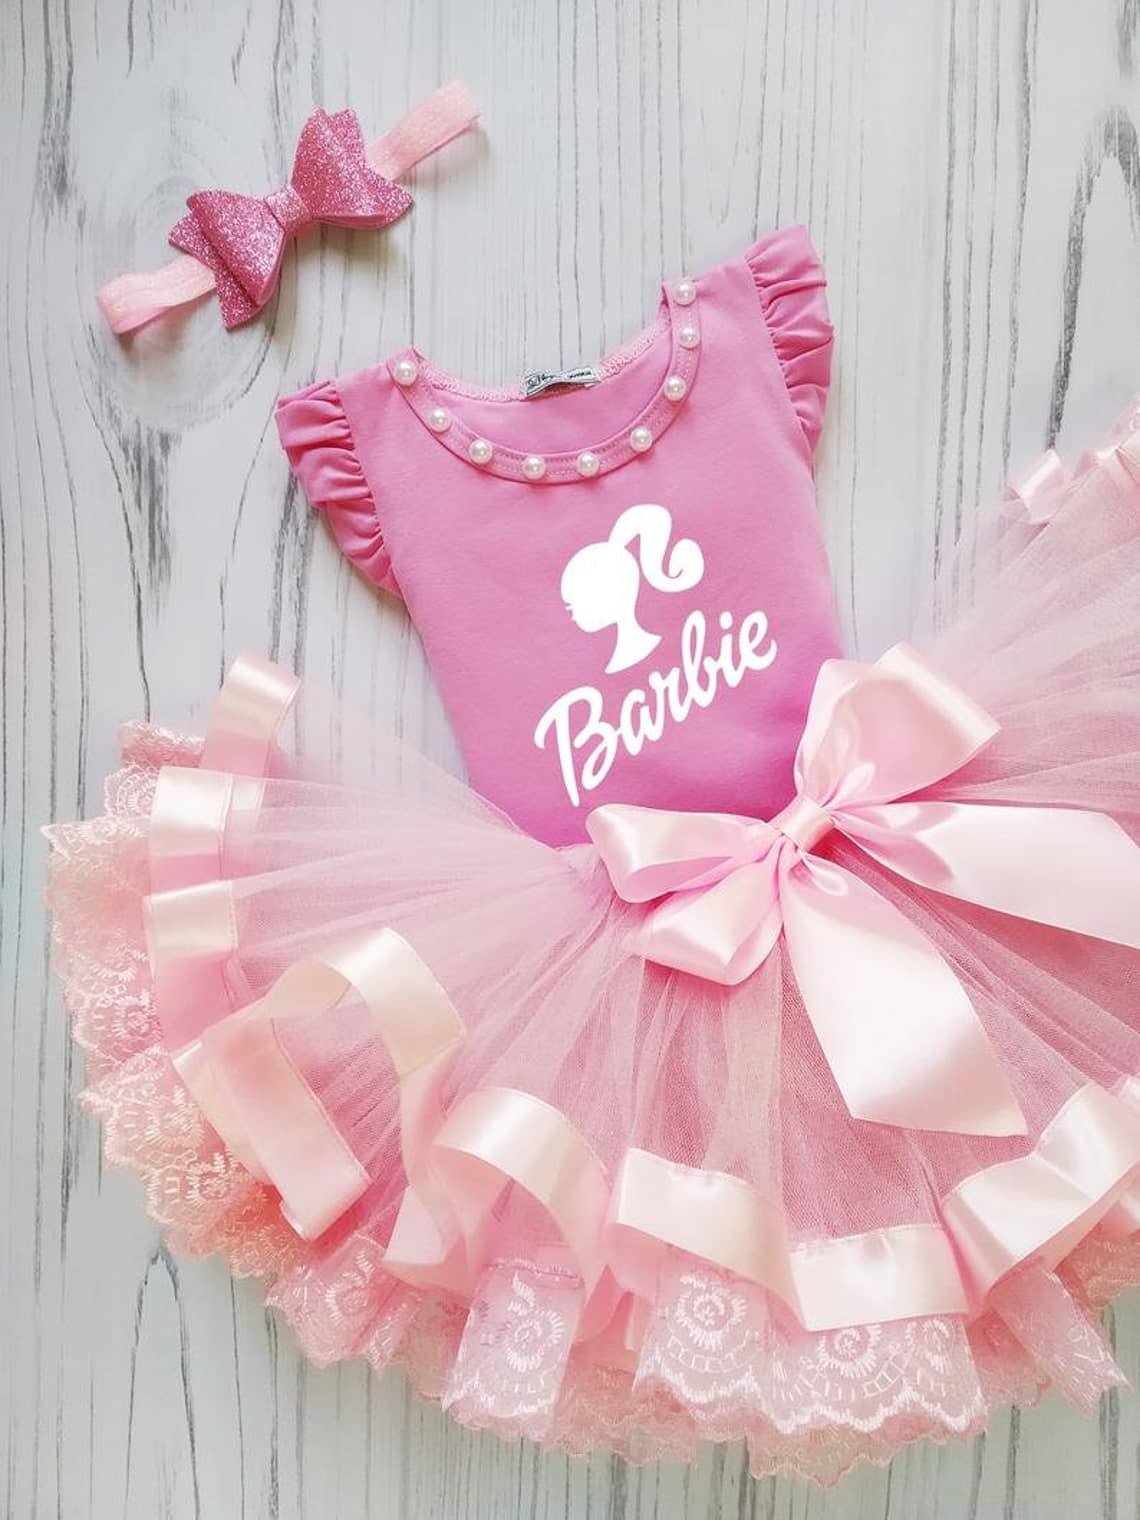 pink-tutu-outfit-kids-baby